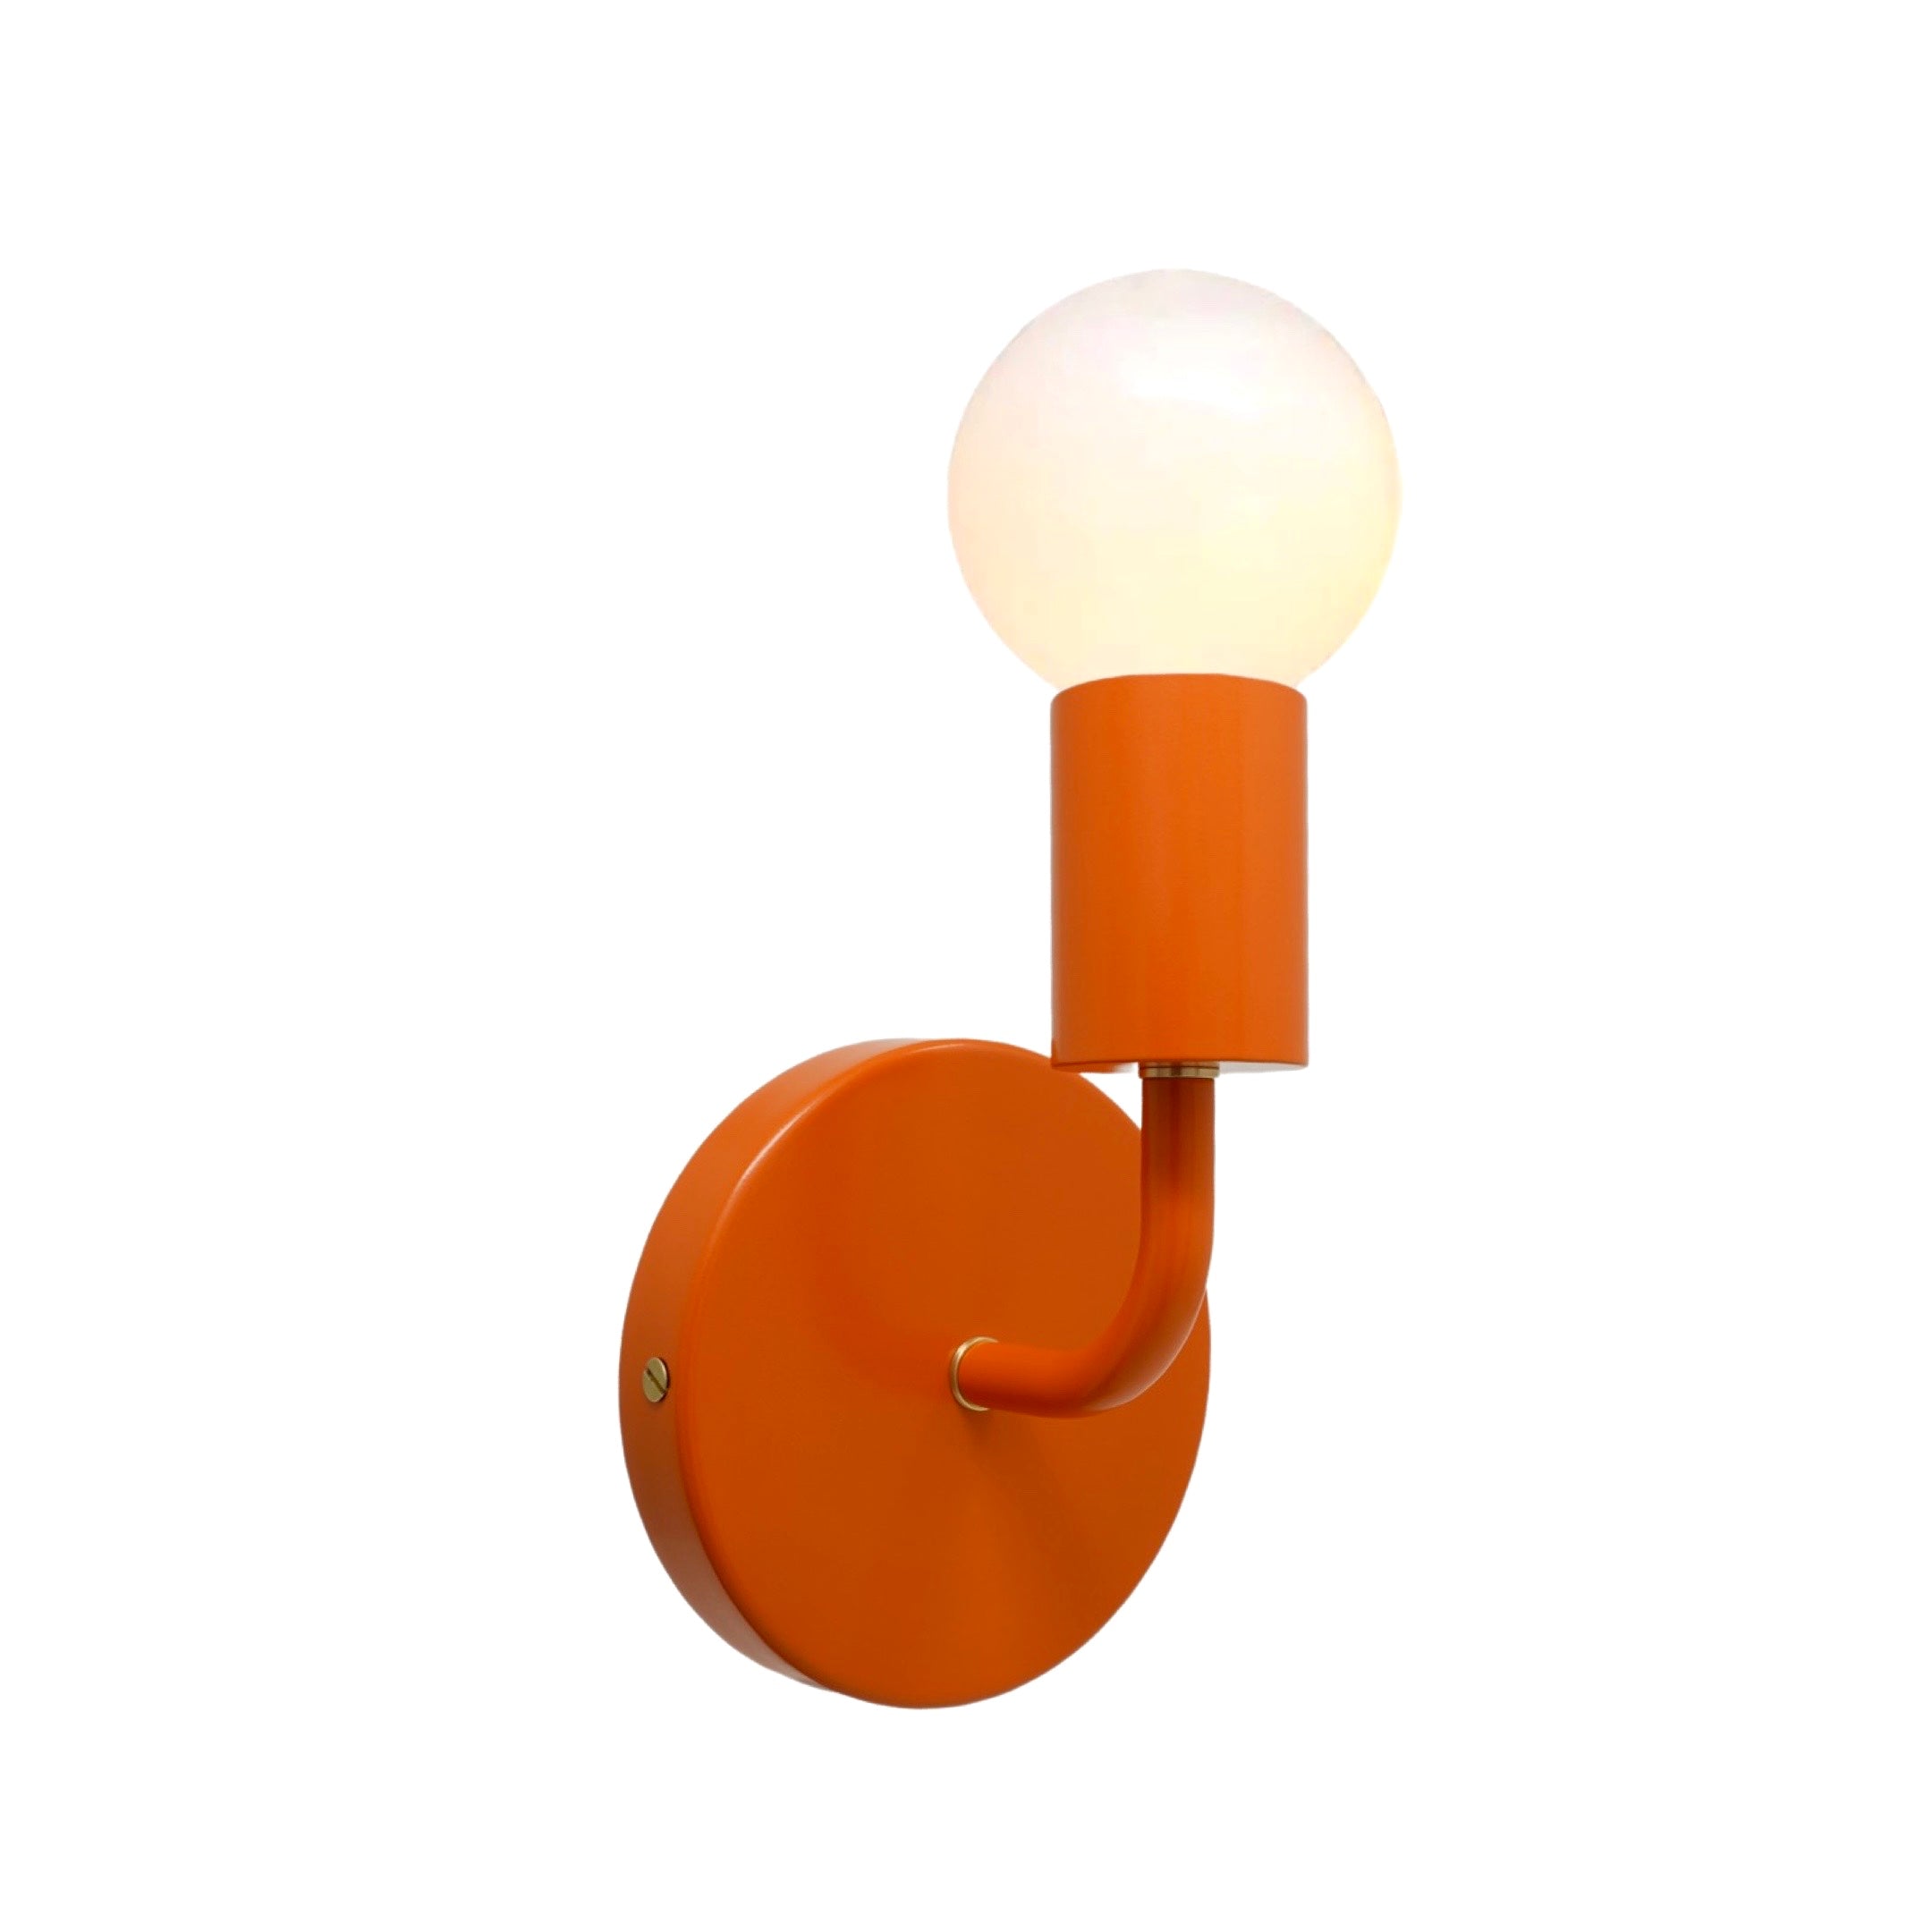 brass and orange snug wall sconce with LED G25 bulb, dutton brown lighting